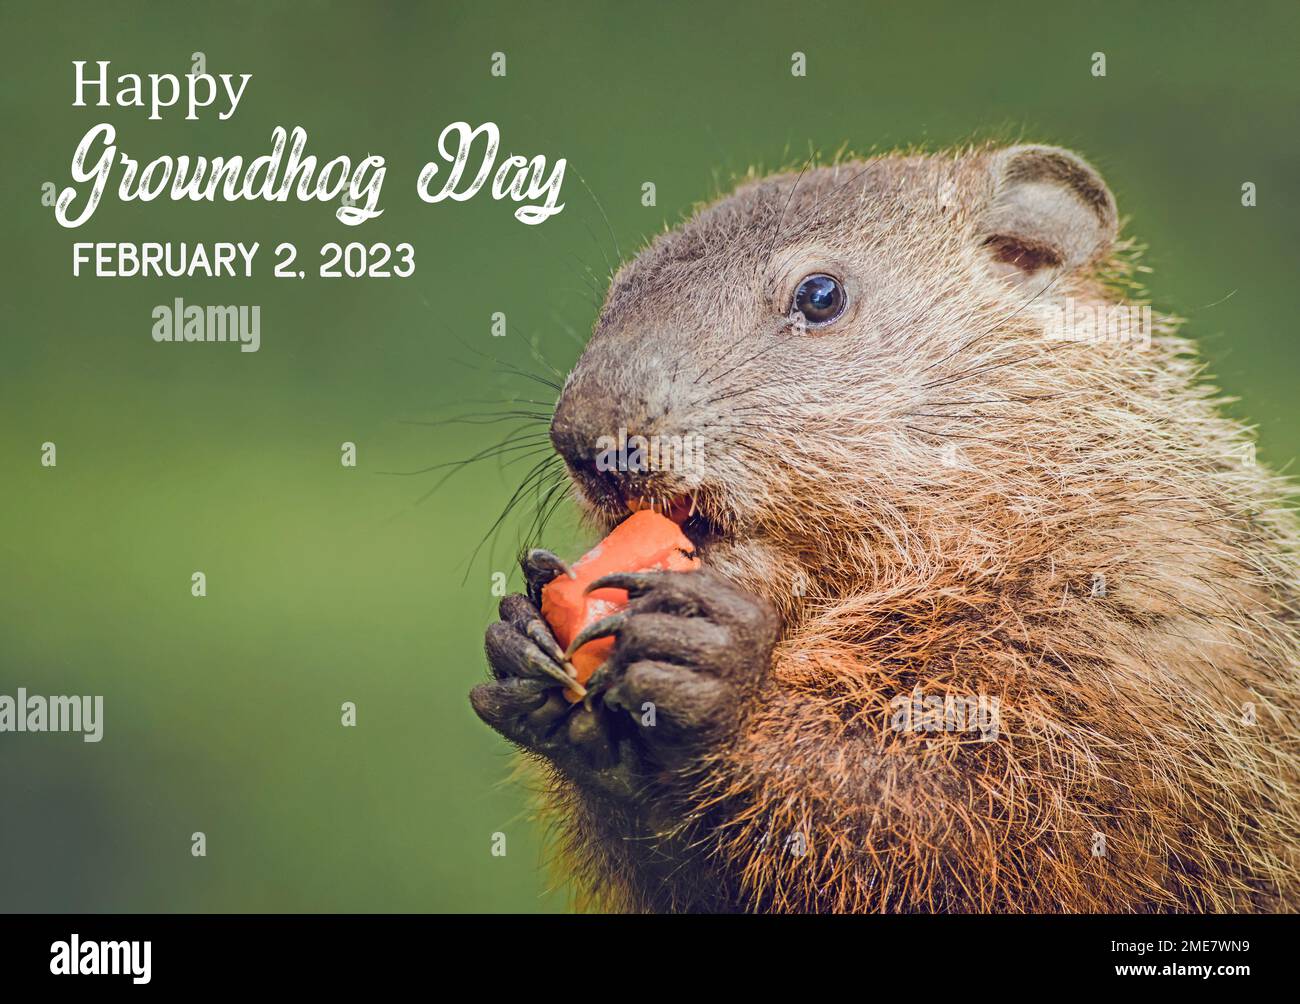 Cute young groundhog closeup great for Happy Groundhog Day 2023 with copy space Stock Photo